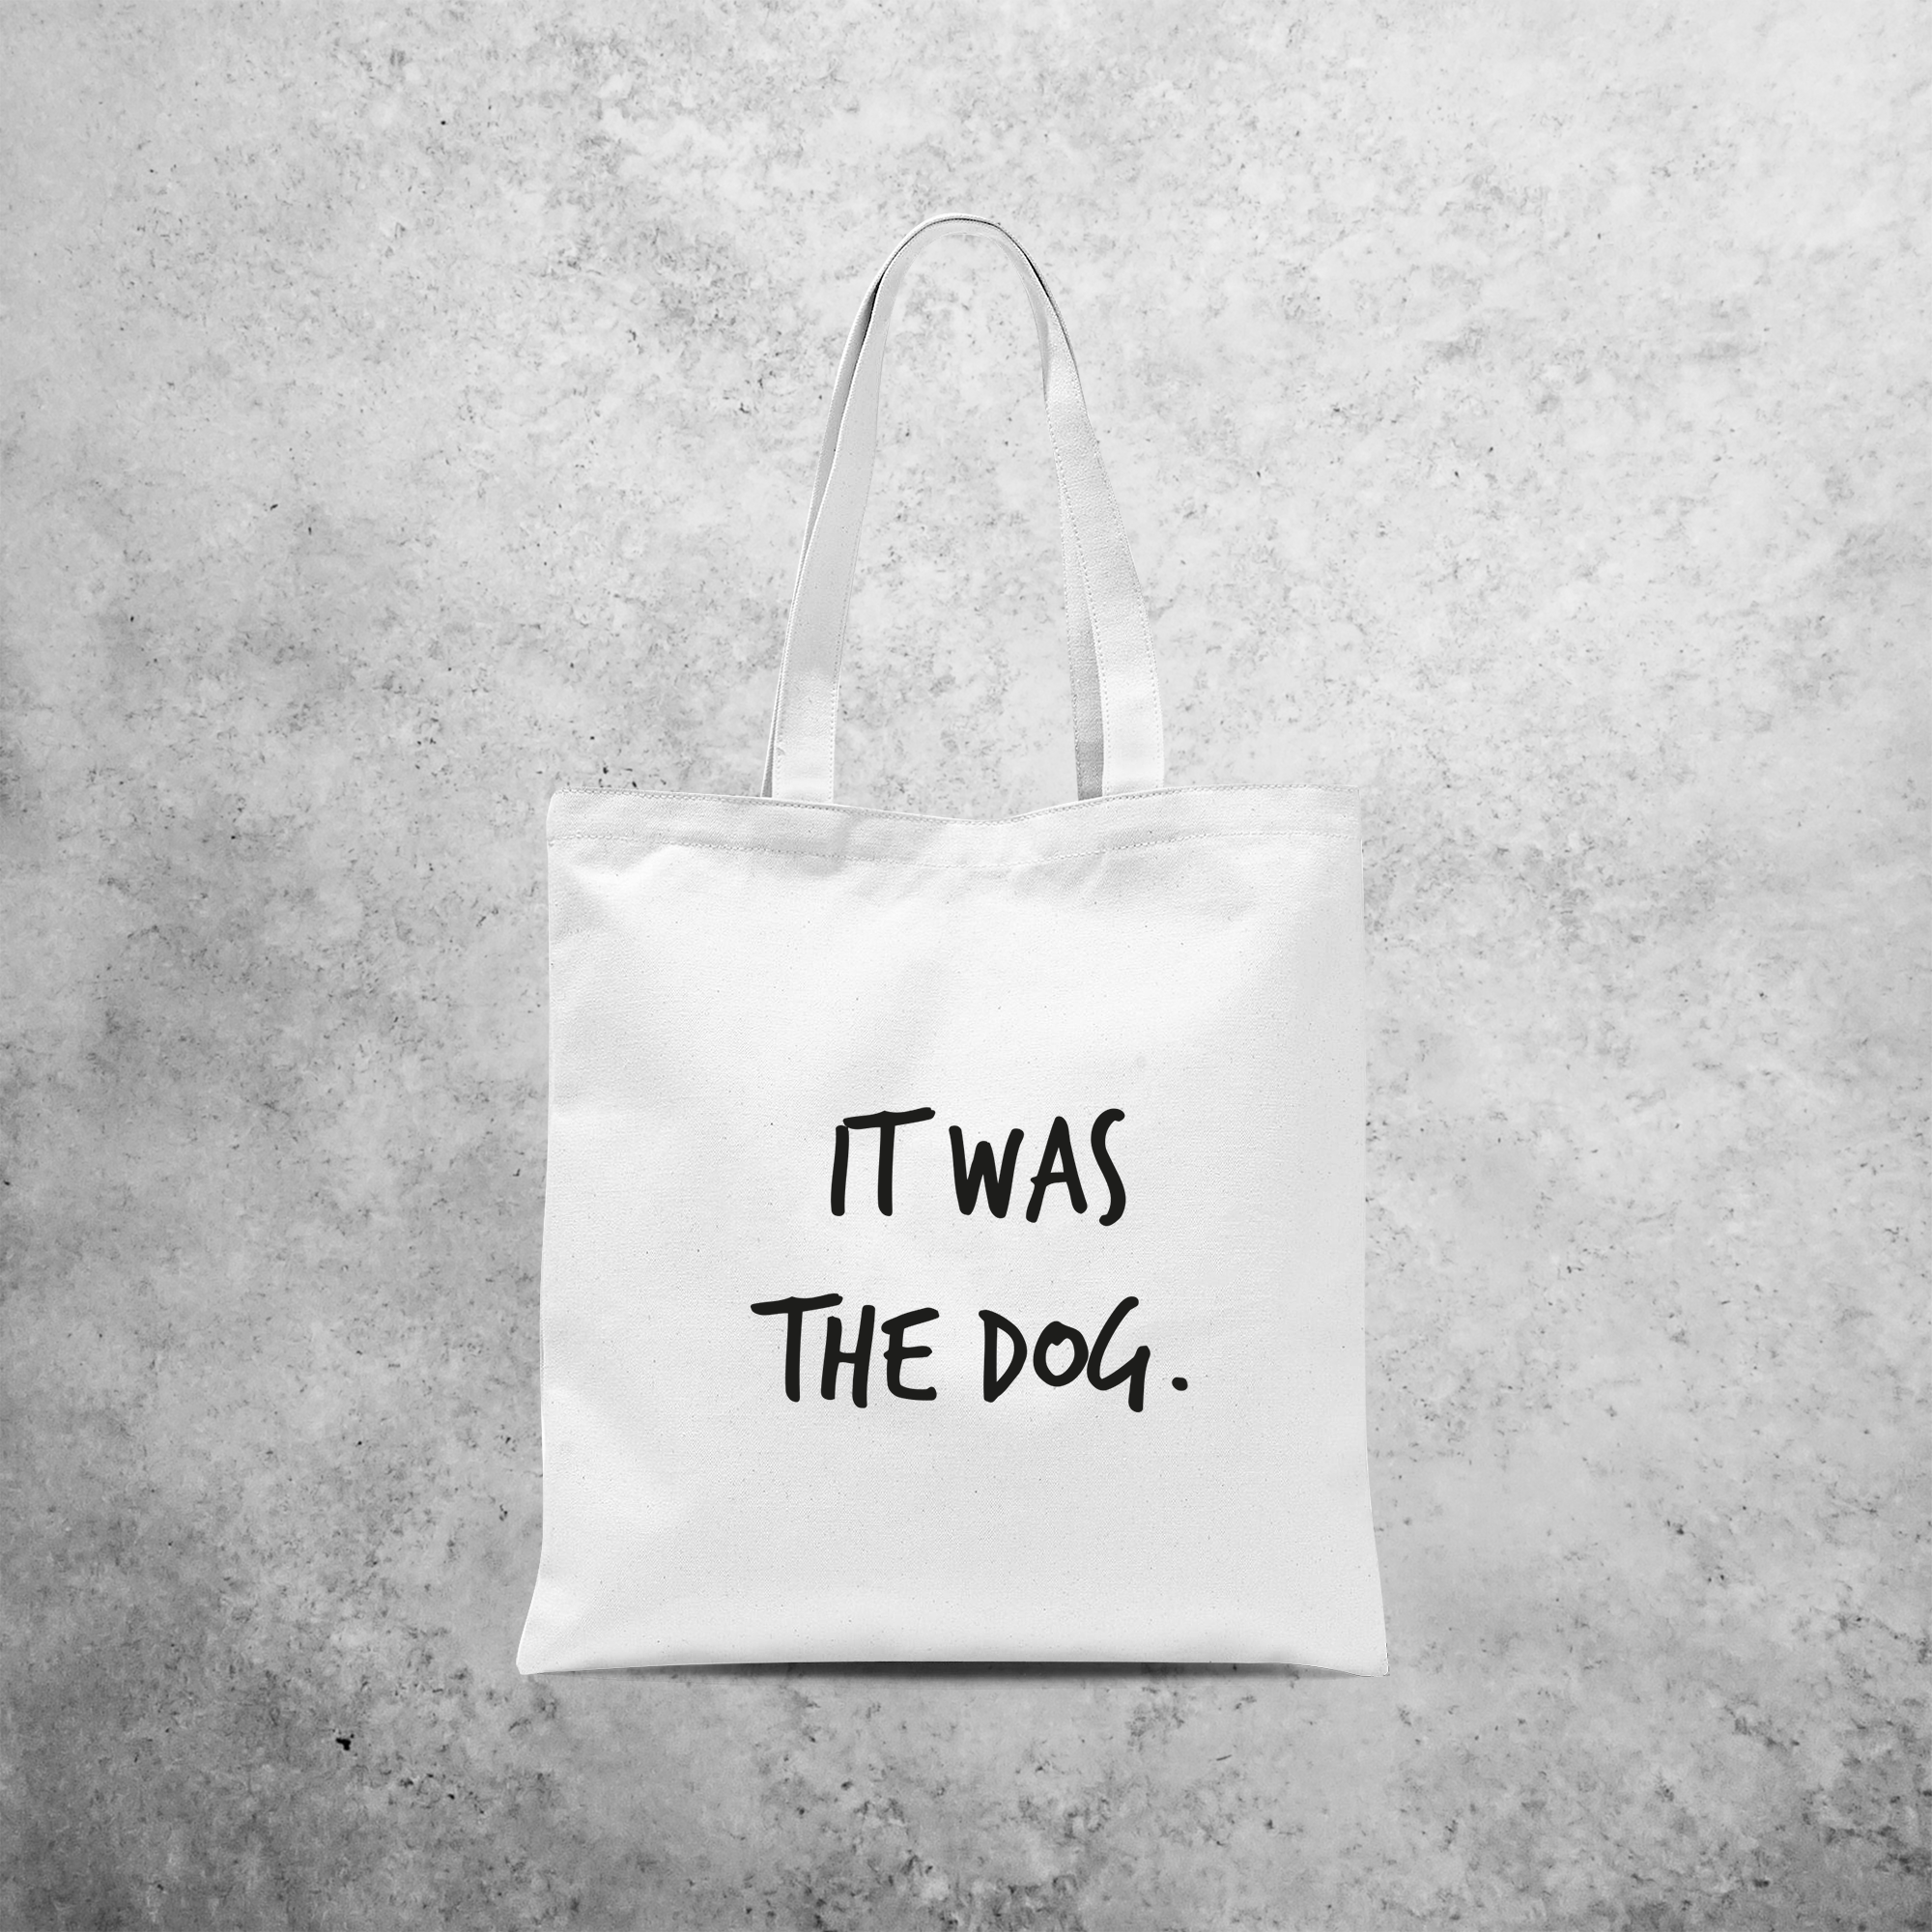 'It was the dog' tote bag